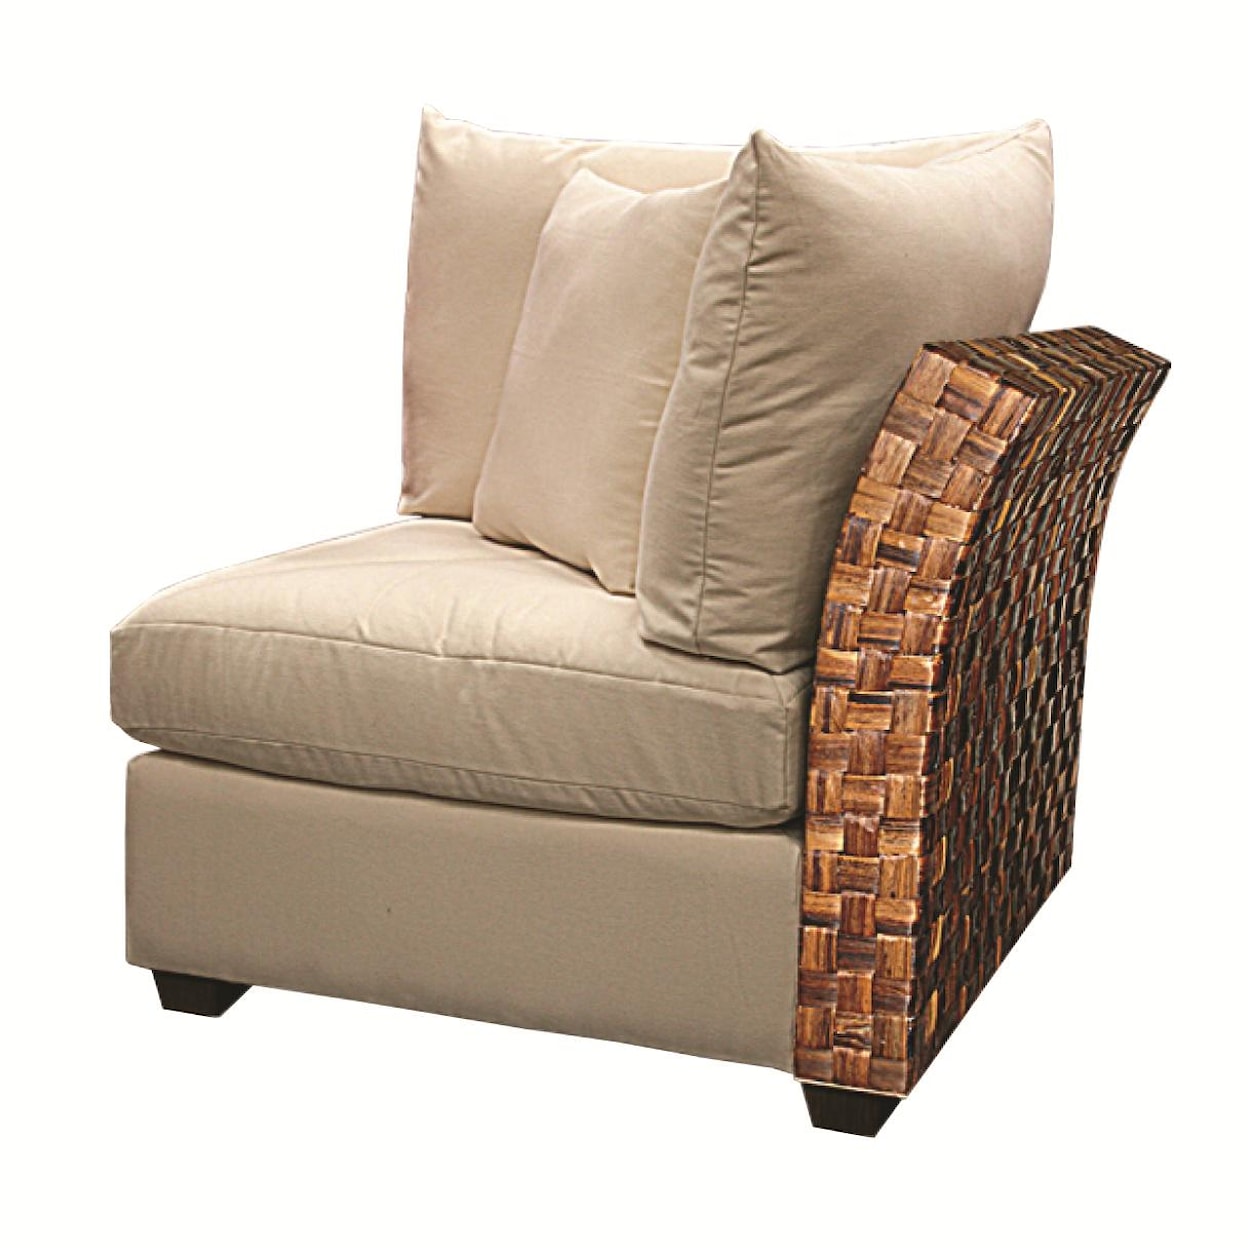 Capris Furniture Chairs and Ottomans Armless Corner Chair